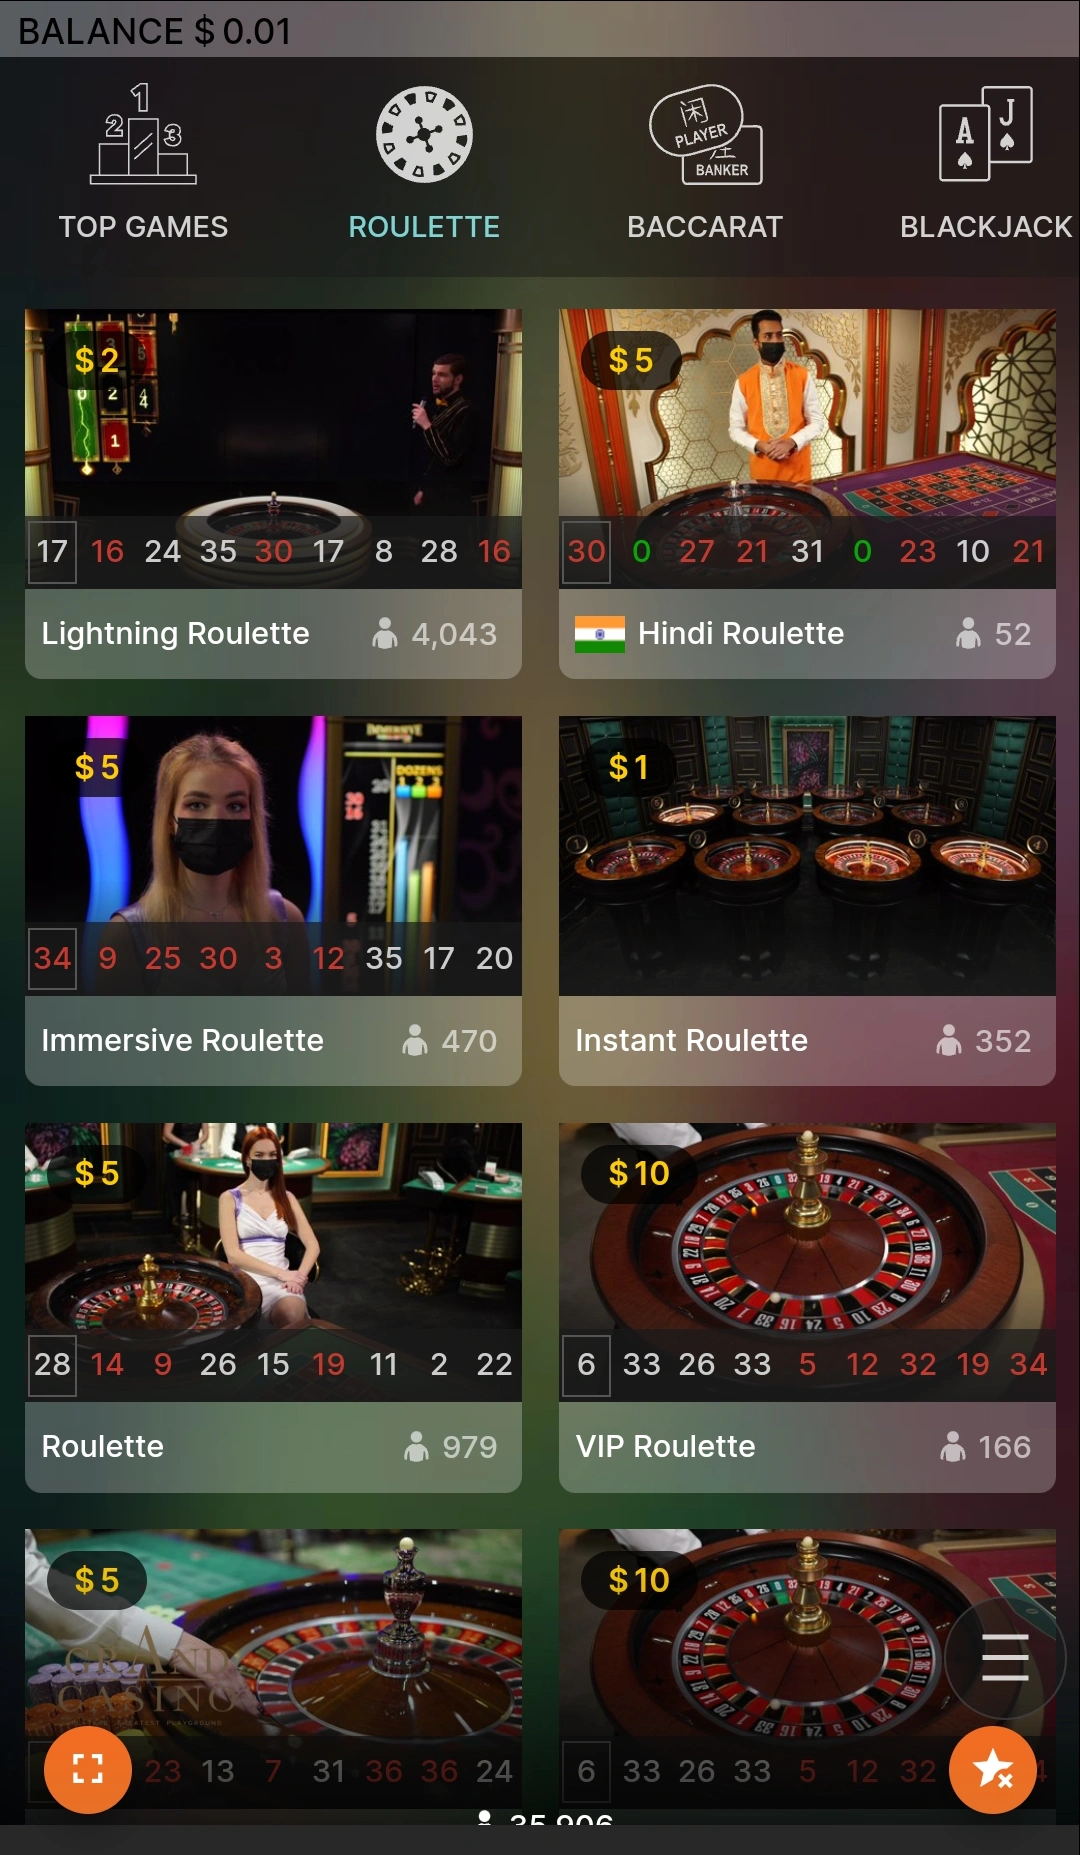 Online casino section in the mobile app